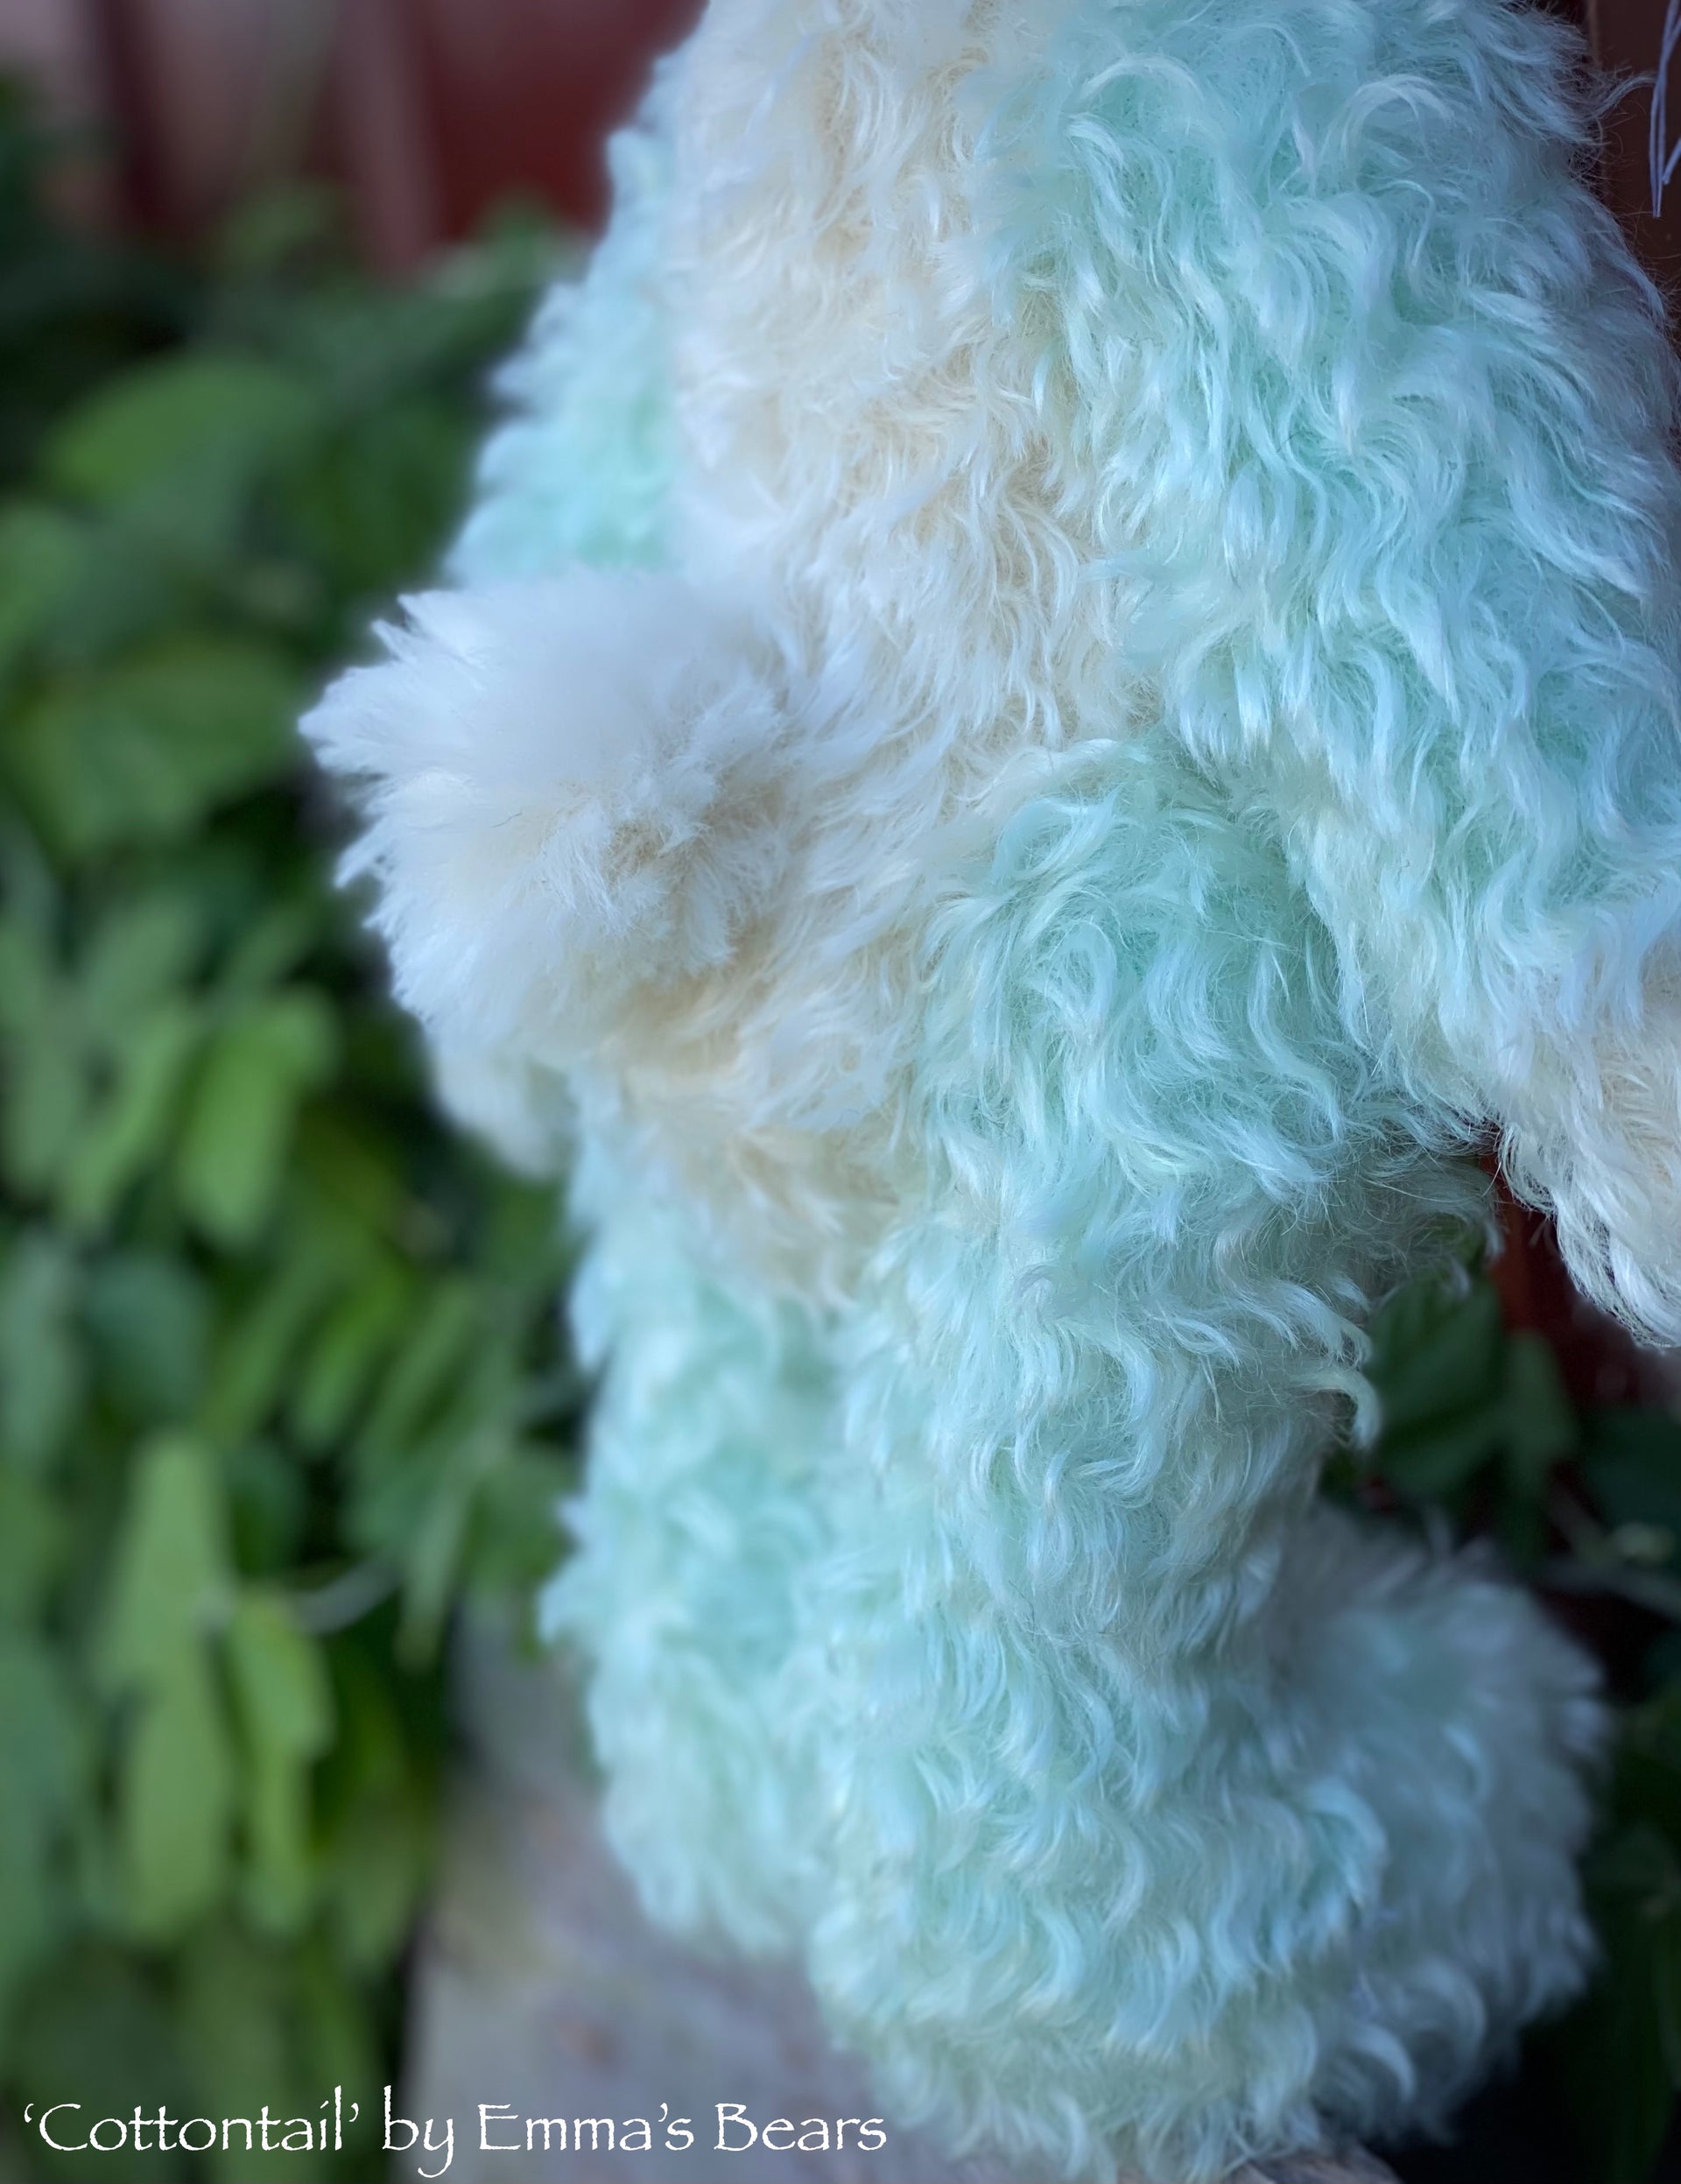 Cottontail - 13" Hand-Dyed Mint Bunny by Emma's Bears - OOAK